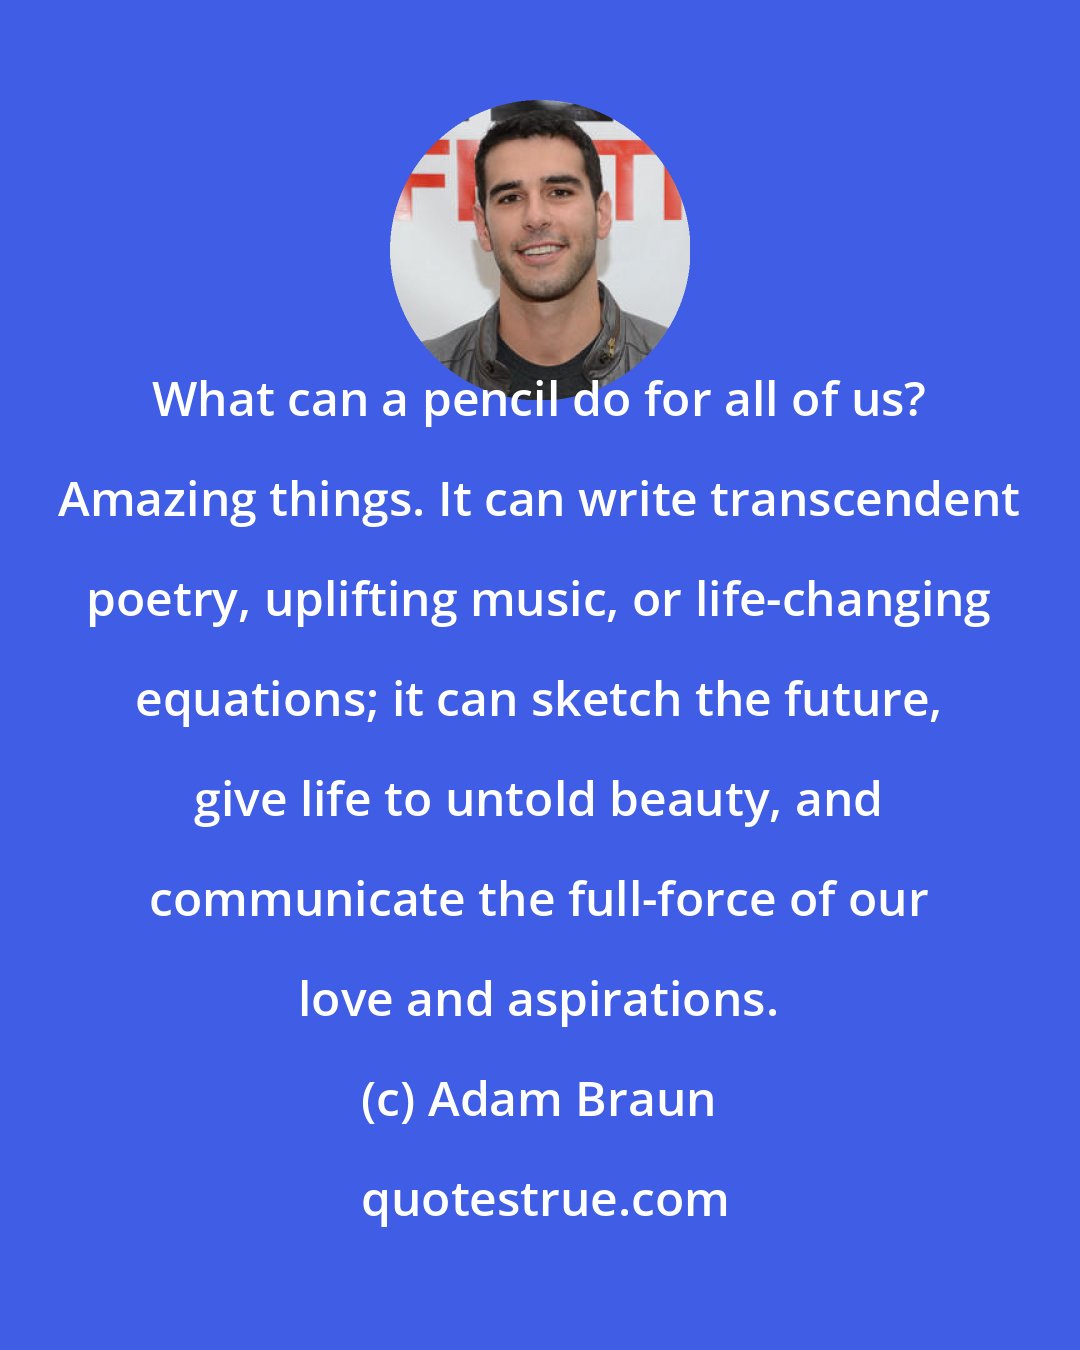 Adam Braun: What can a pencil do for all of us? Amazing things. It can write transcendent poetry, uplifting music, or life-changing equations; it can sketch the future, give life to untold beauty, and communicate the full-force of our love and aspirations.